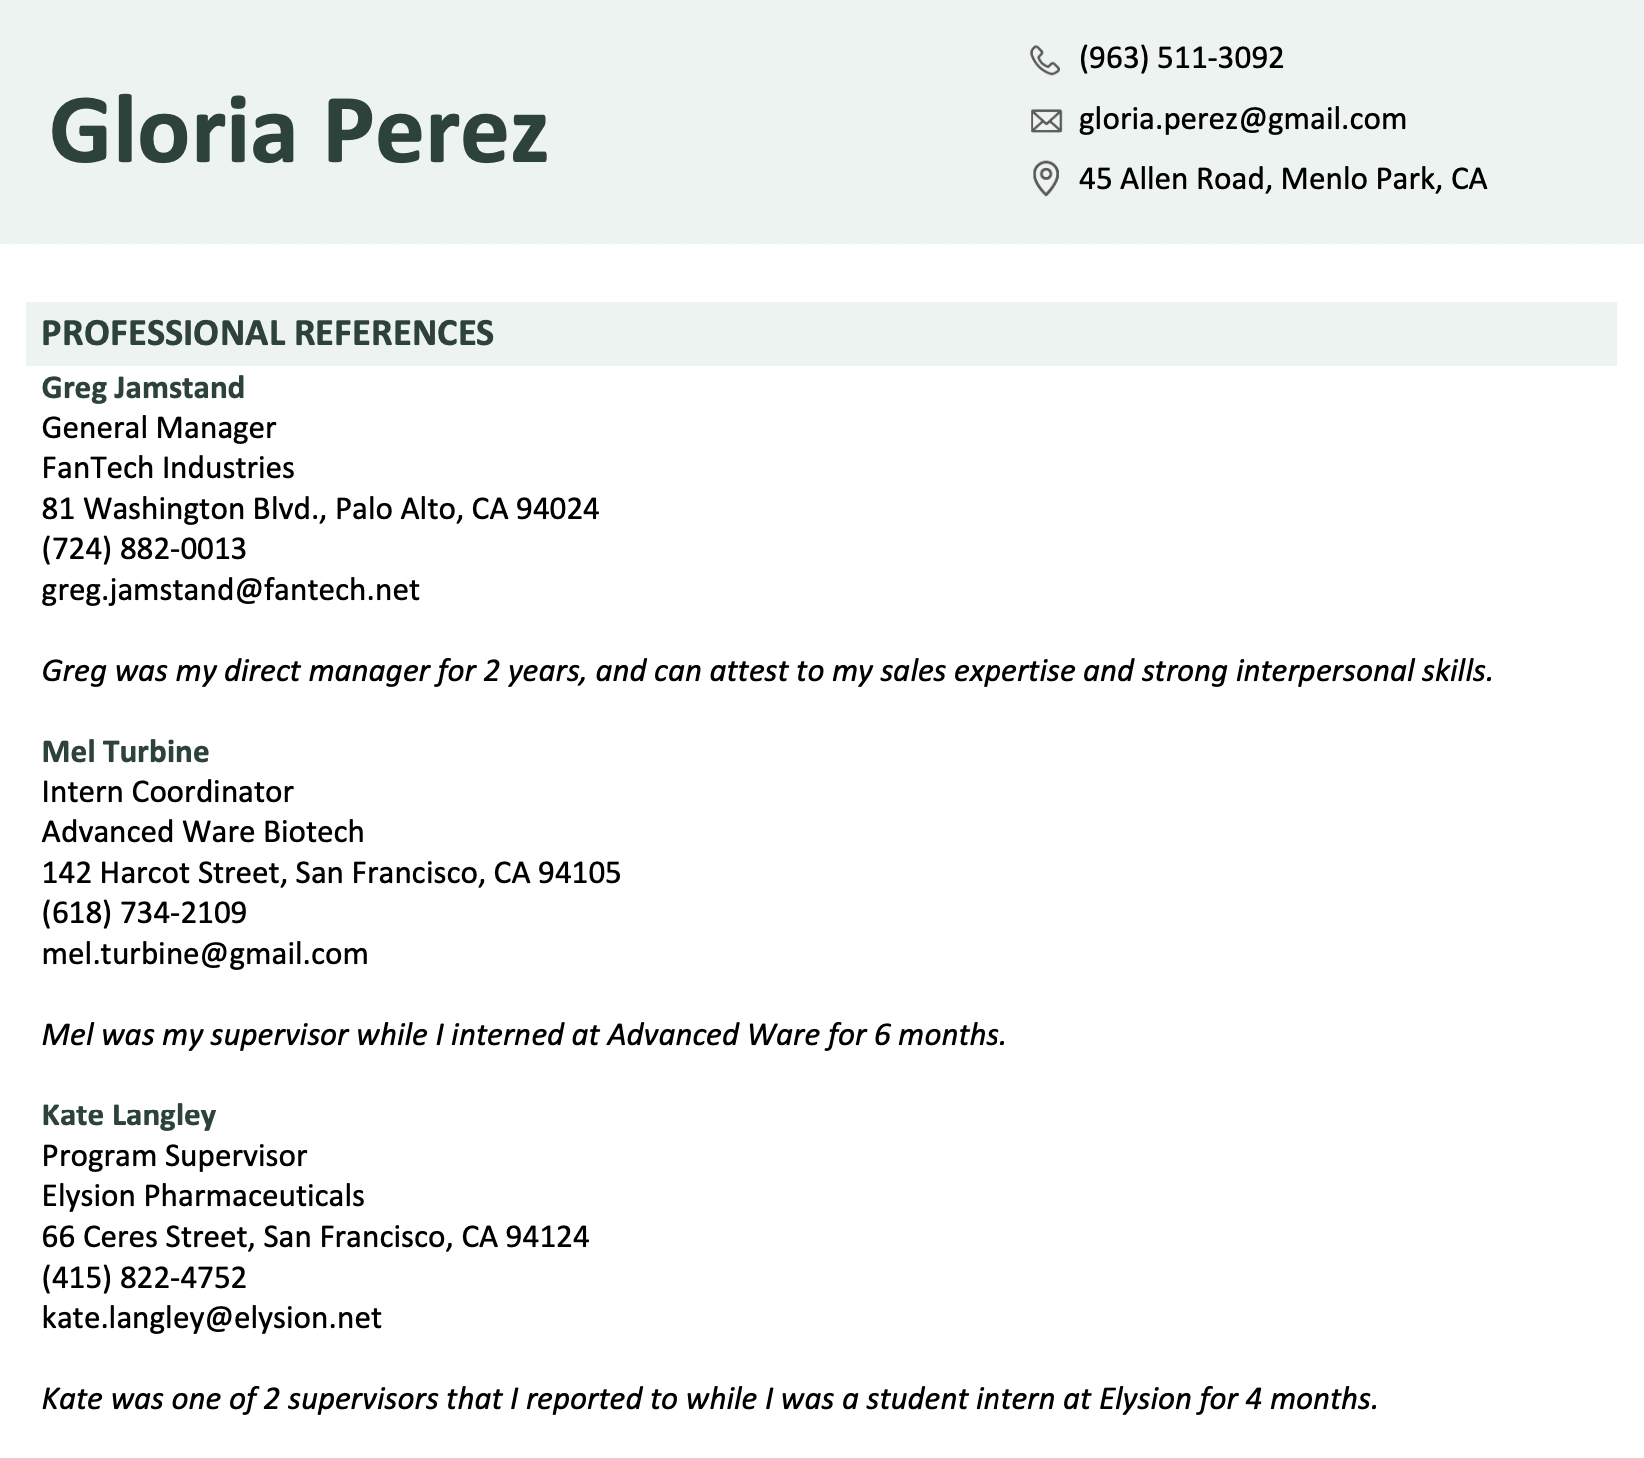 An example of three professional references on a resume